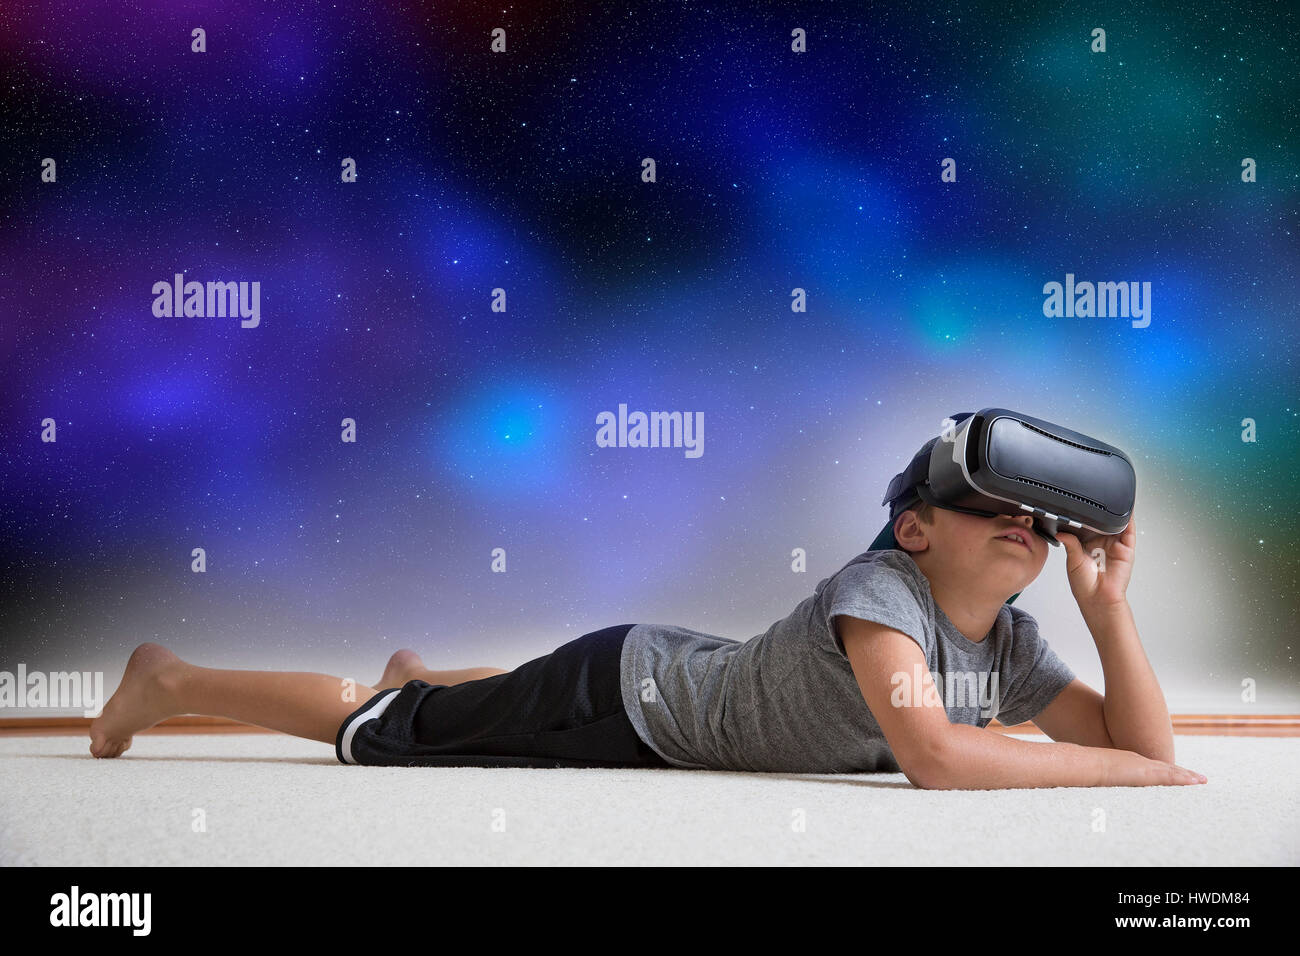 Young boy lying on floor, wearing virtual reality headset, looking into night sky, digital composite Stock Photo